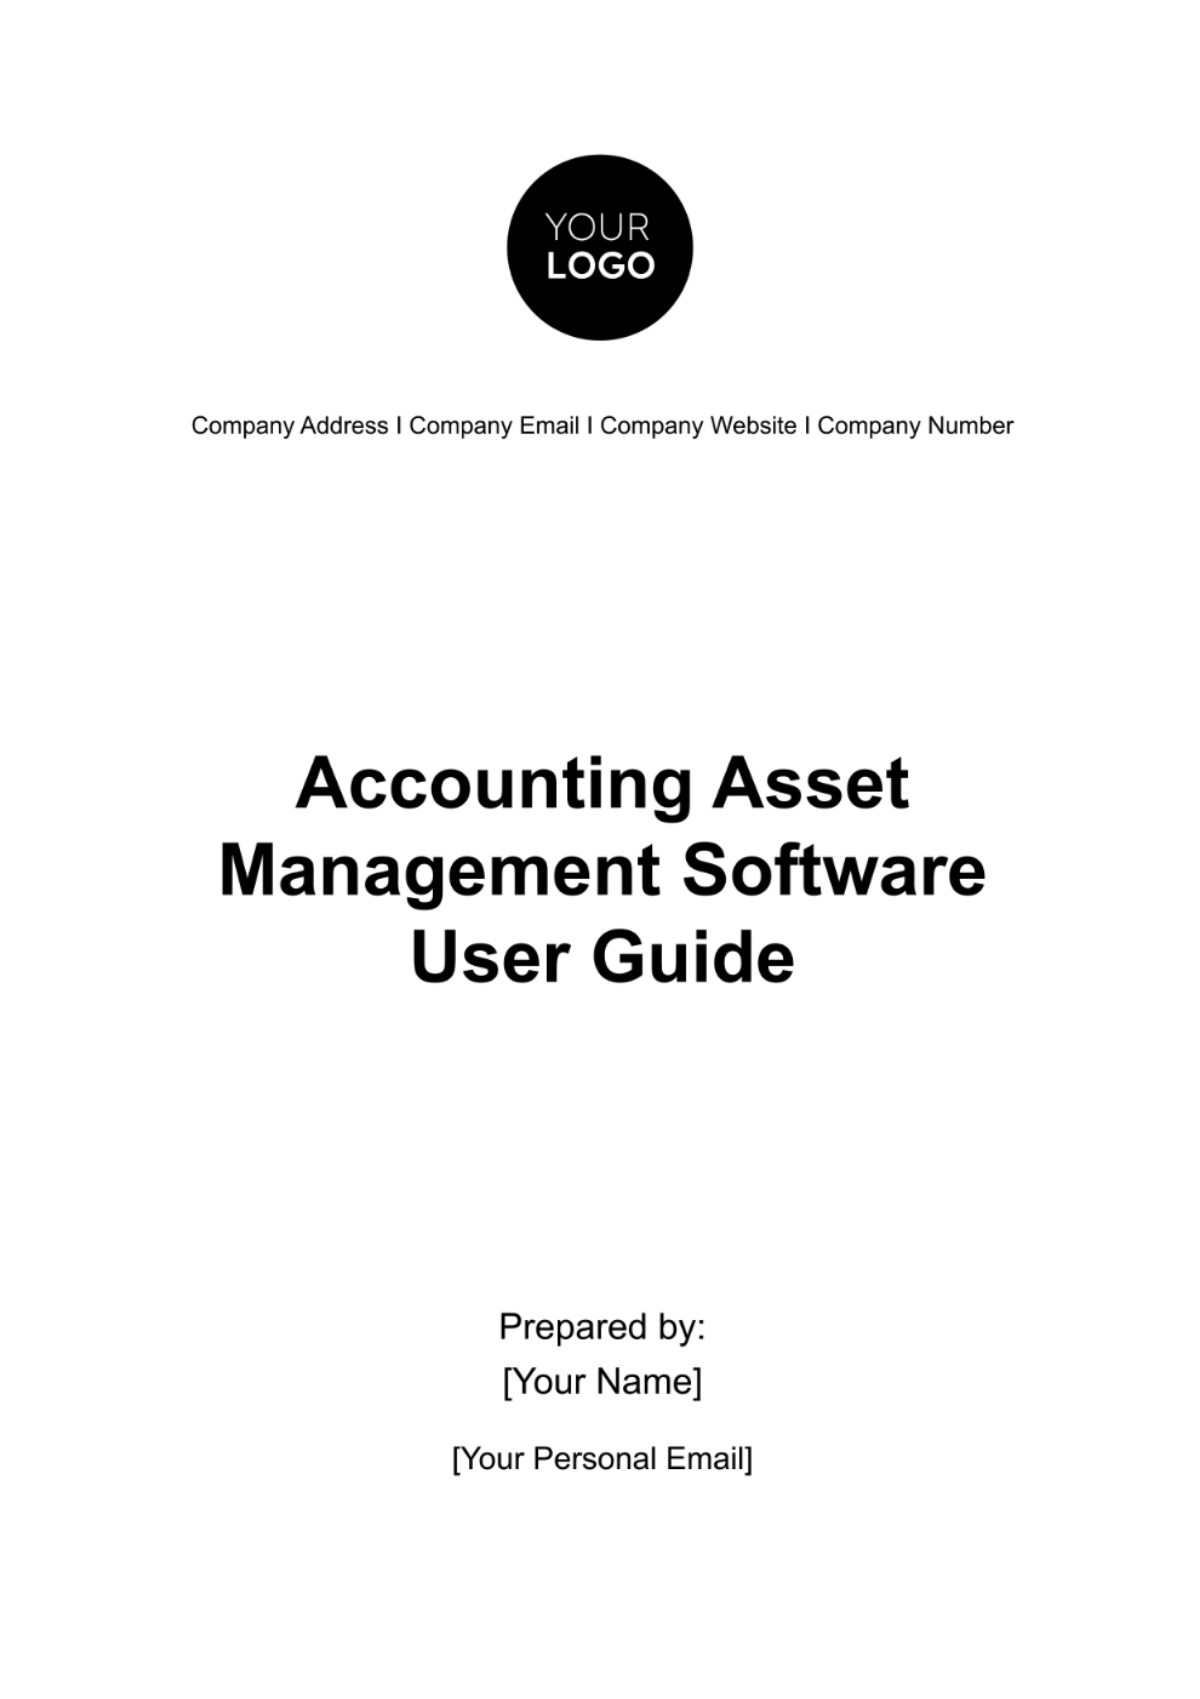 Accounting Asset Management Software User Guide Template